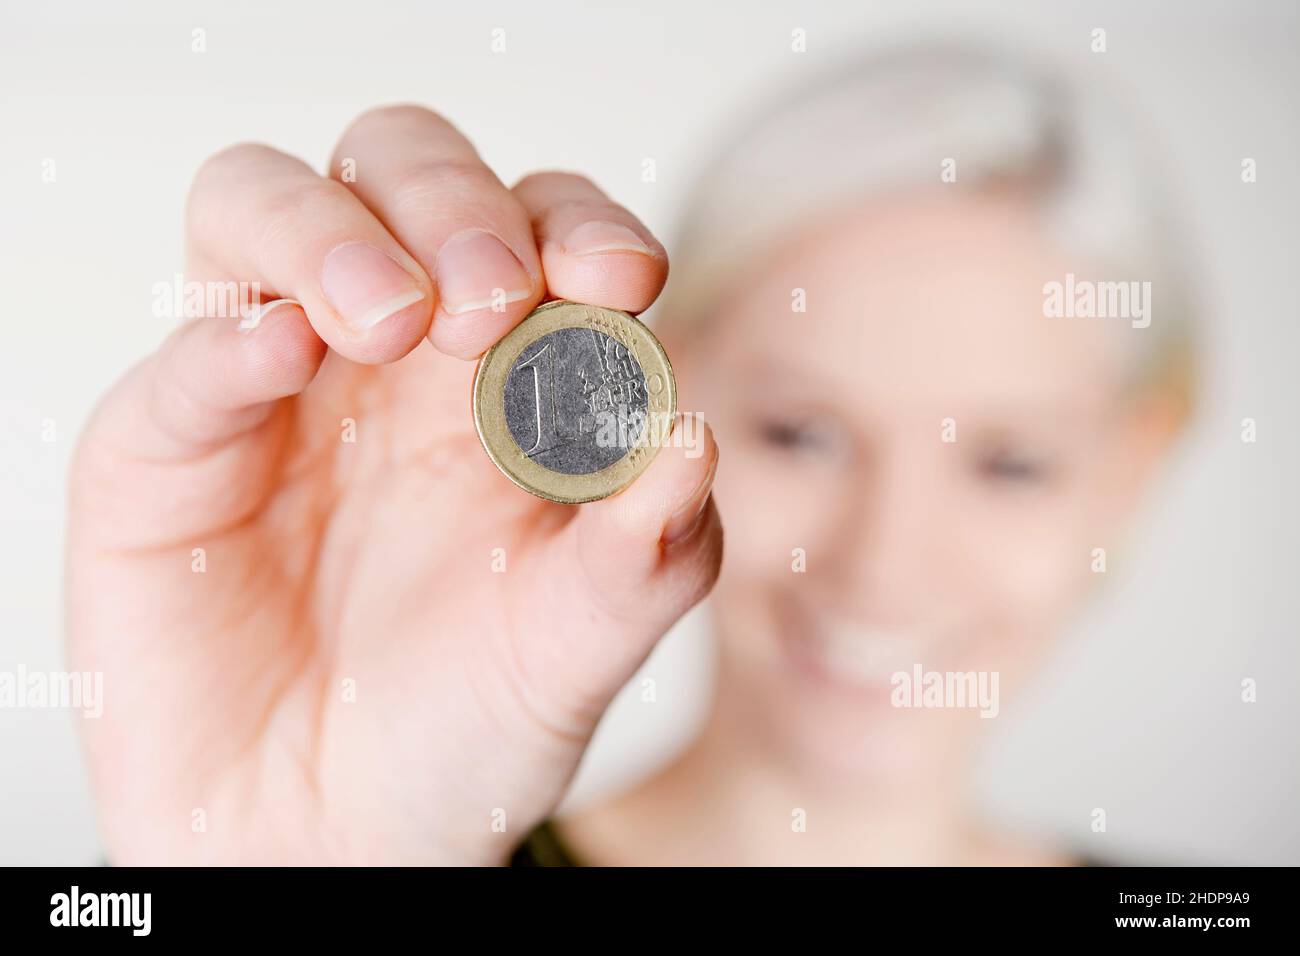 young woman, save, coin, 1 euro, girl, girls, woman, young women, saves, coins, one euro Stock Photo